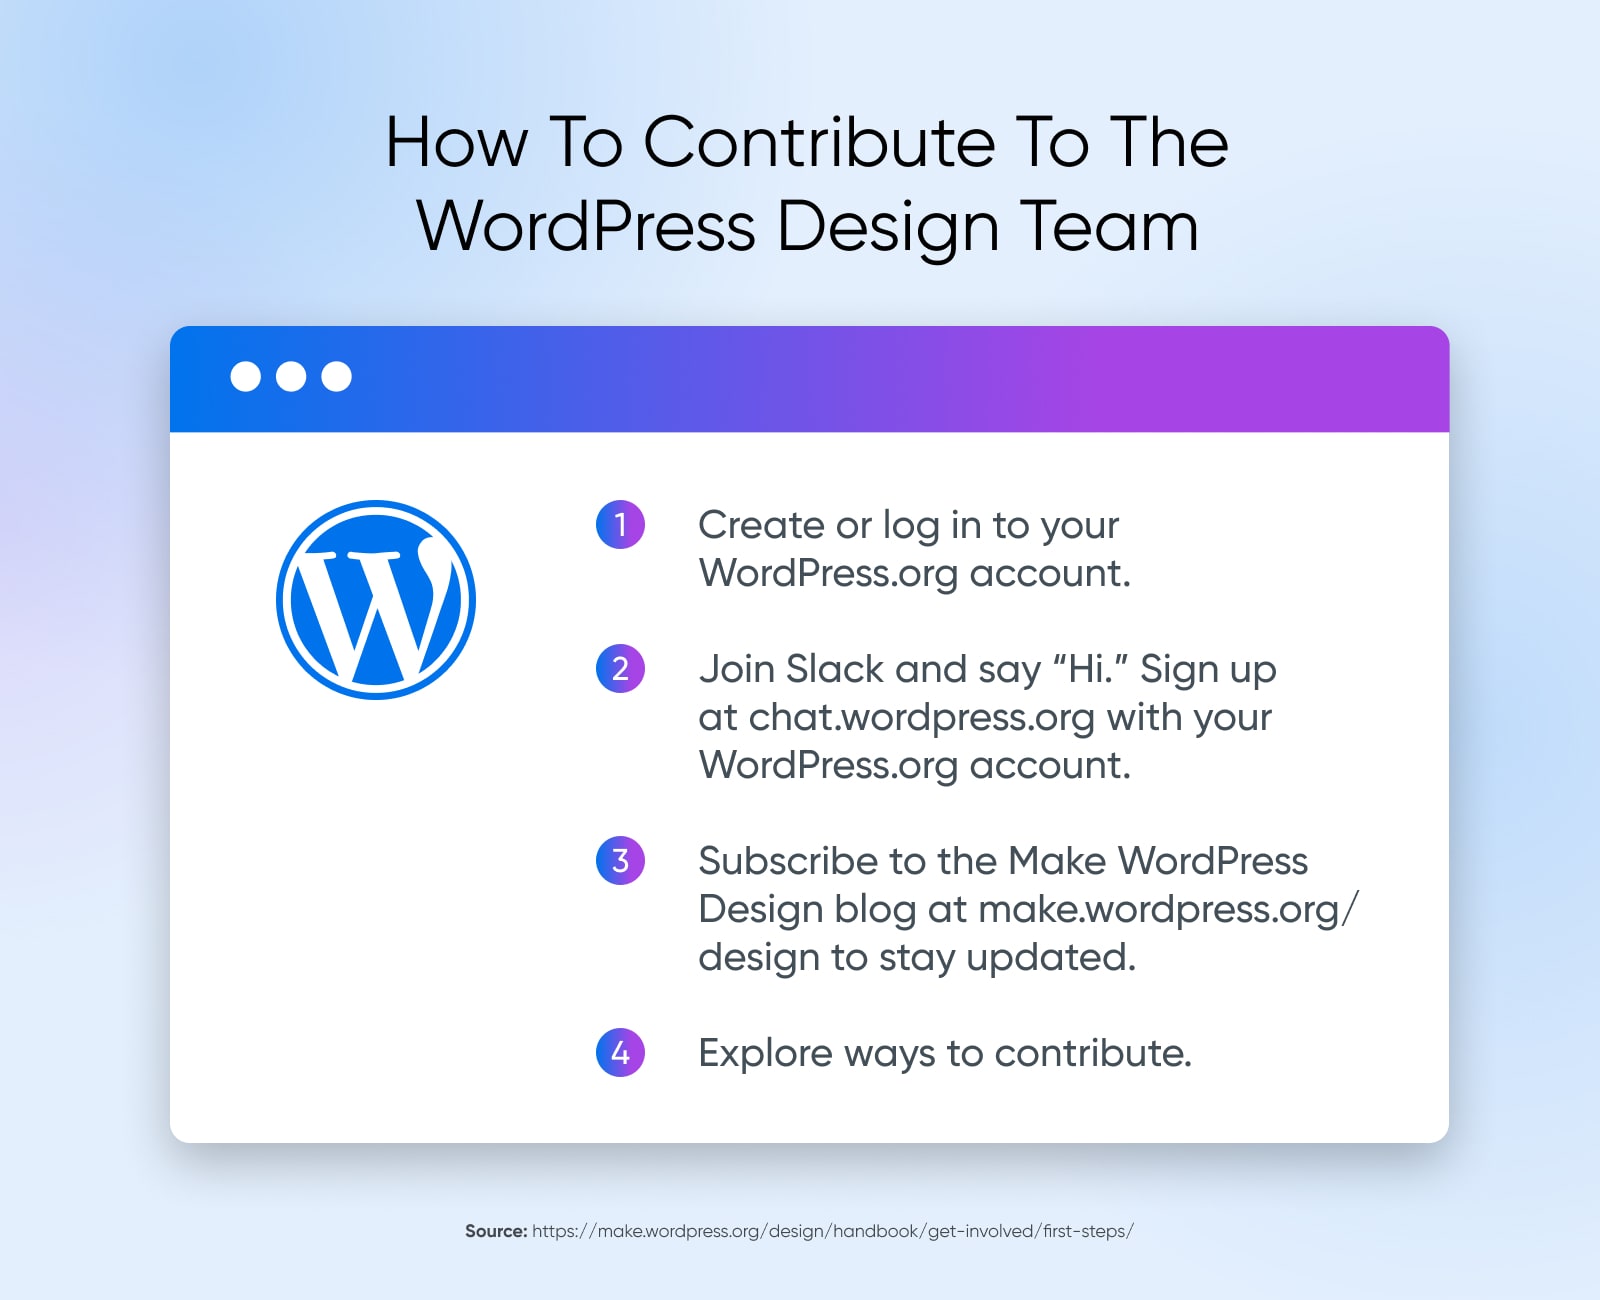 steps to contribue to the WP design team: log in, use Slack, subscribe, and explore ways to contribute 